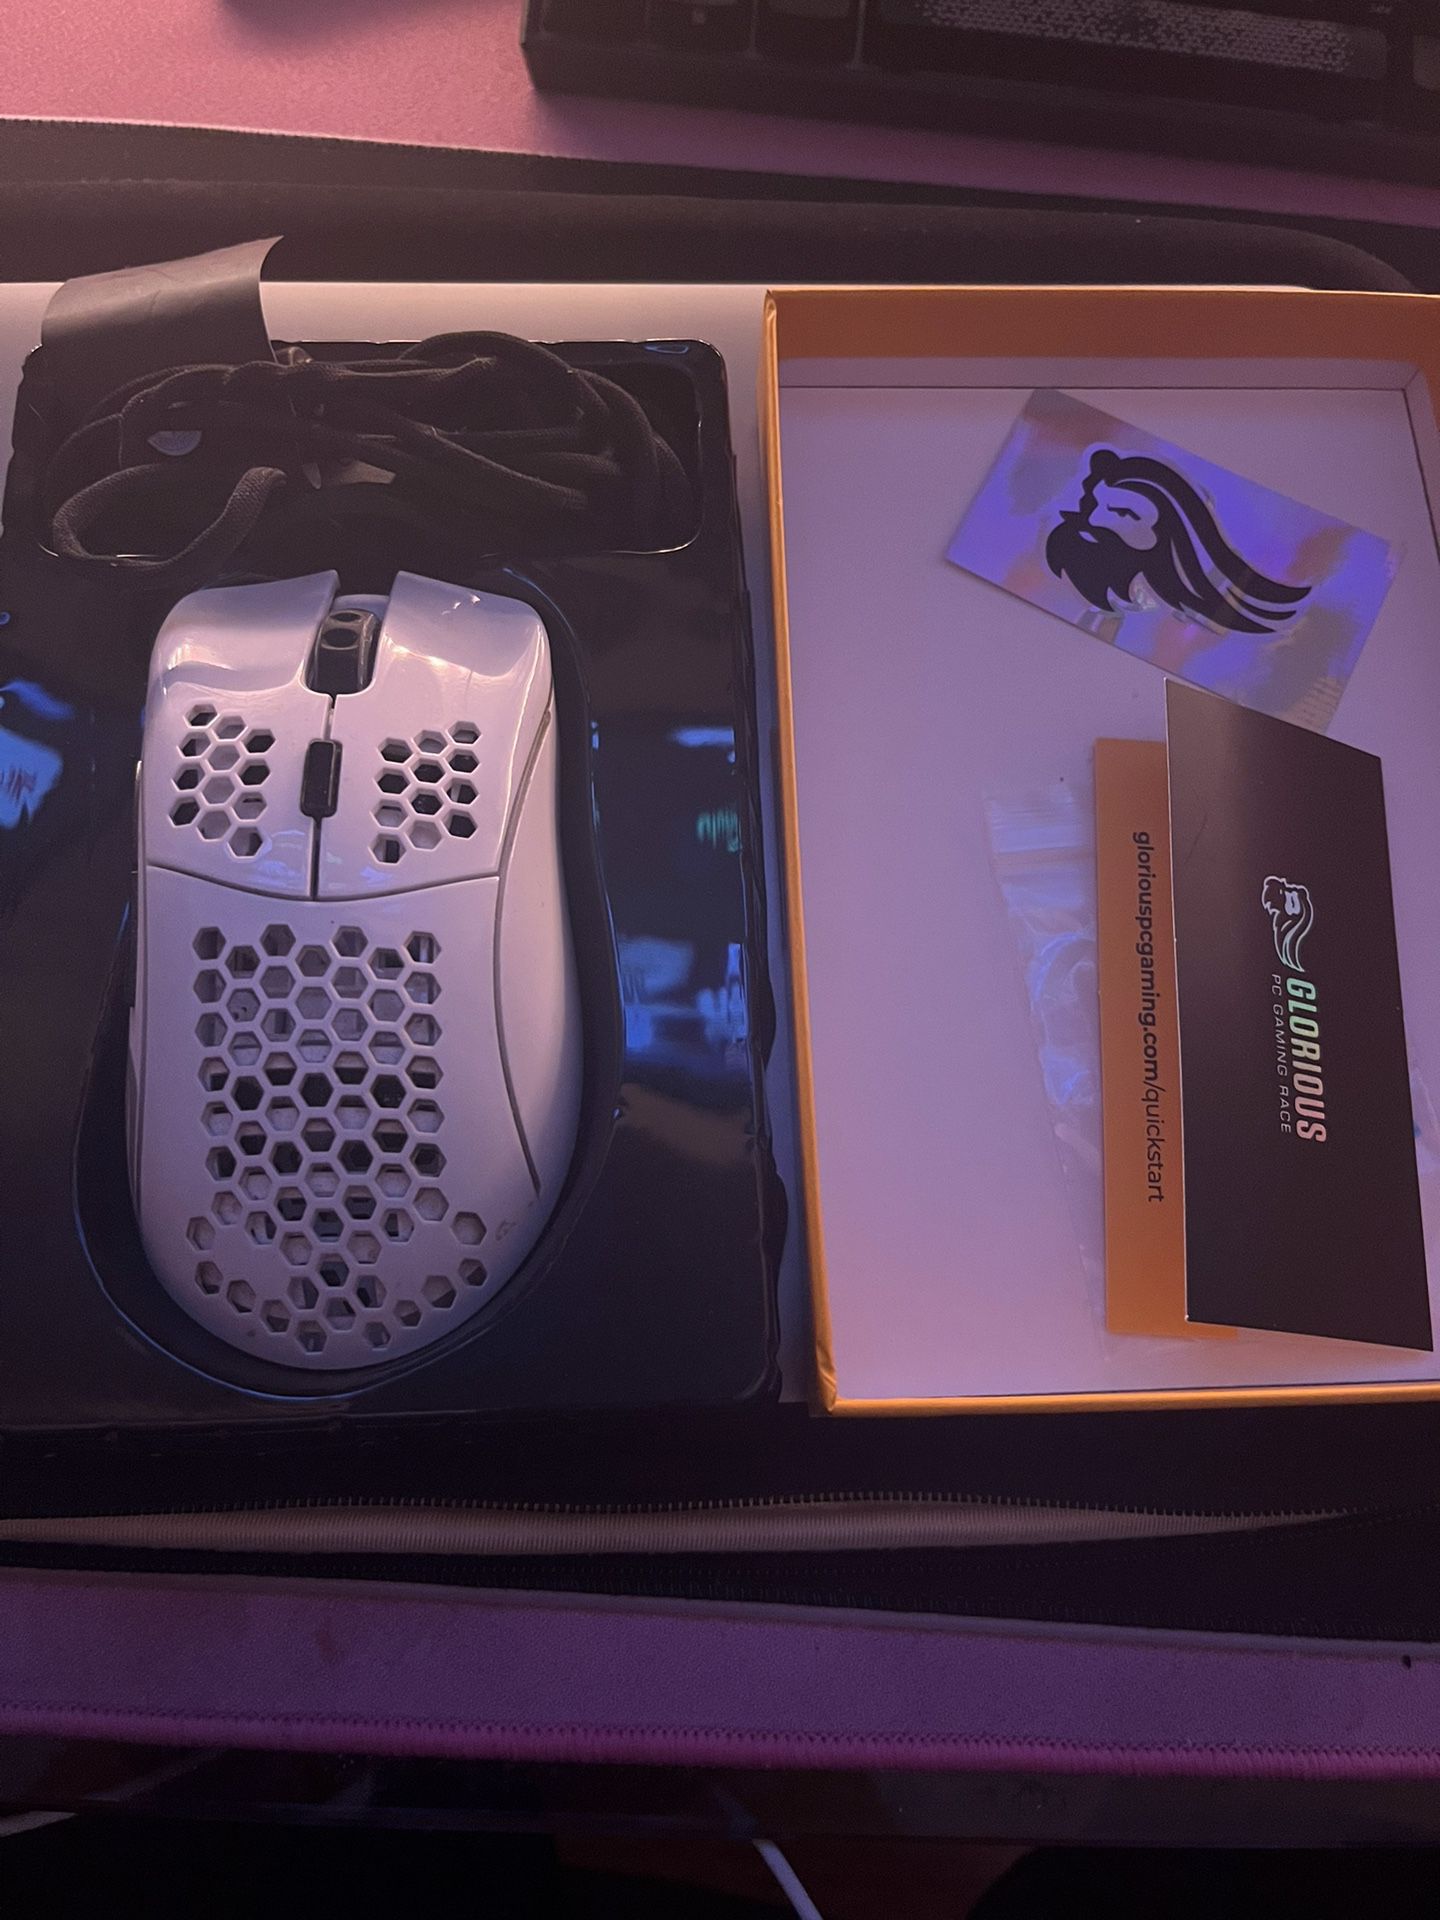 Glorious Model D Gaming Mouse